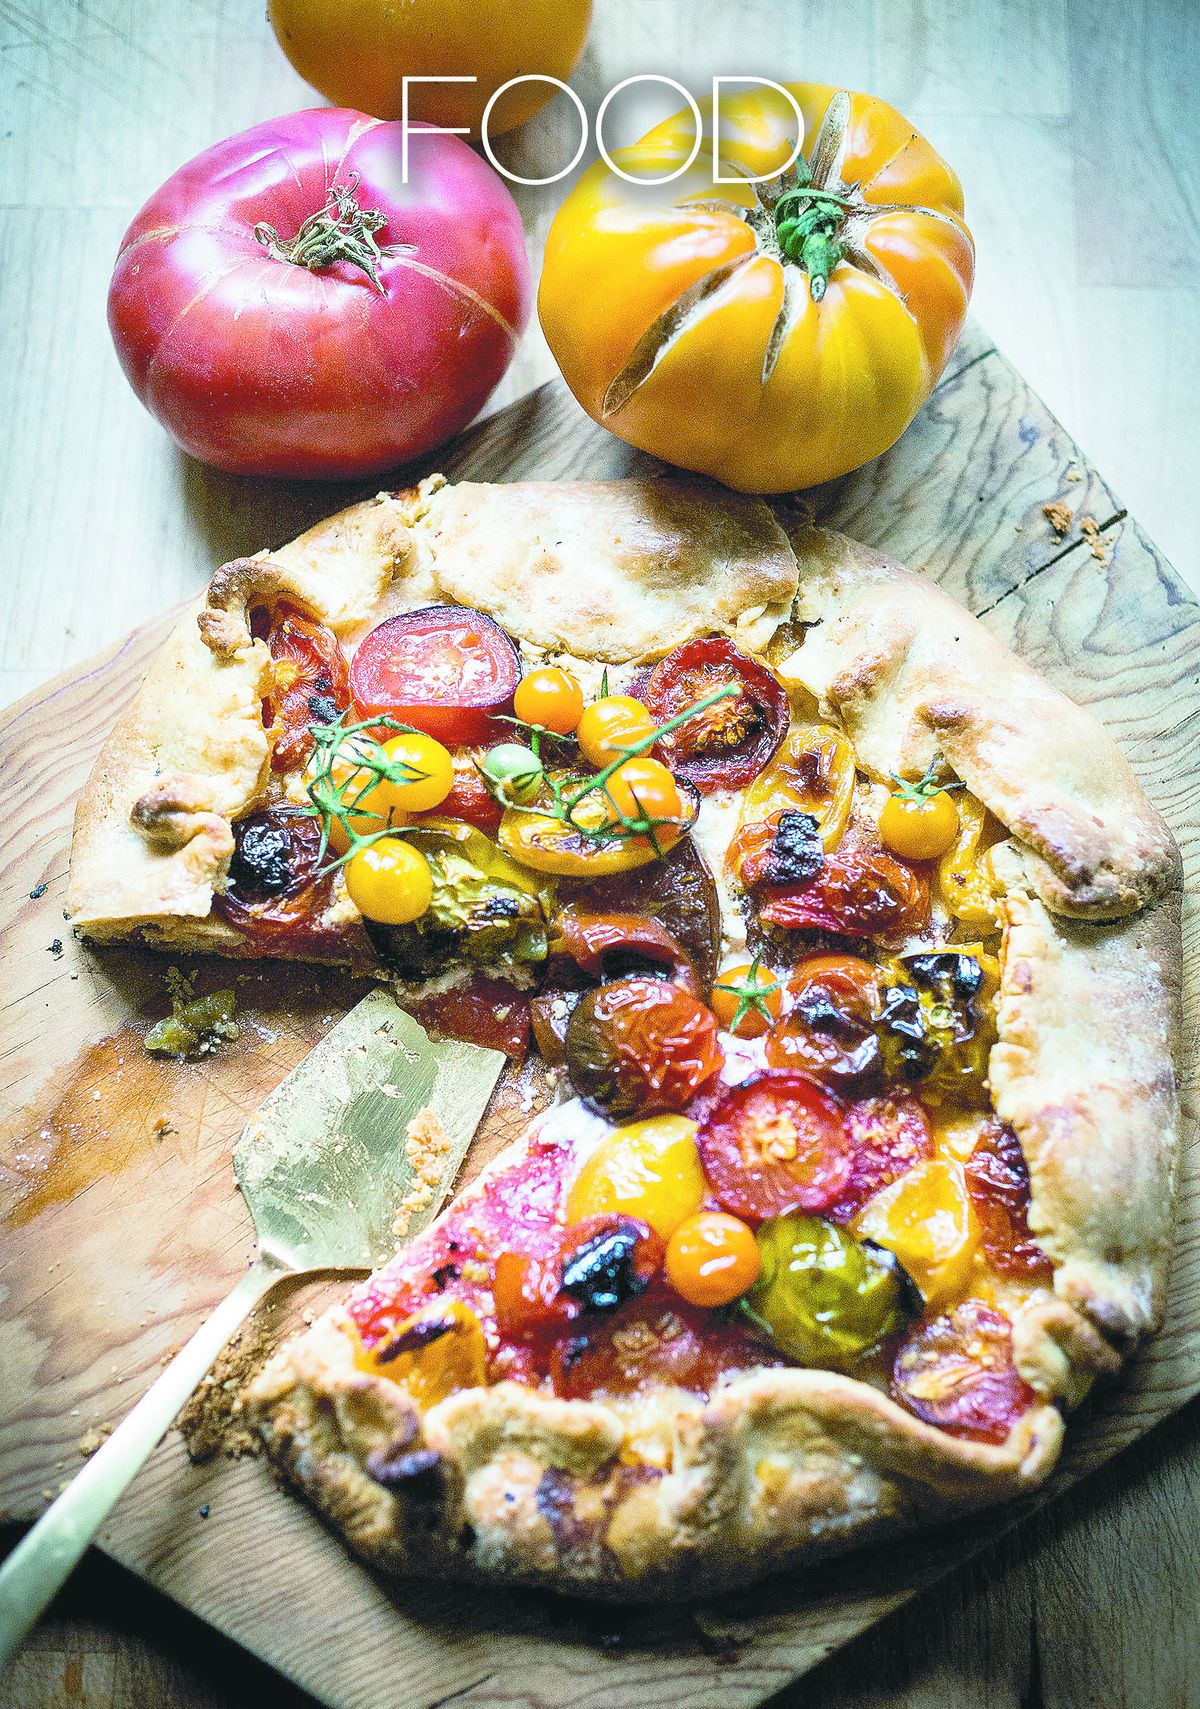 Two pounds of Jackson Farm tomatoes help supply some earthy flavors to Rustic Tomato Galette. Find the recipe on Page C7. (Photo courtesy)